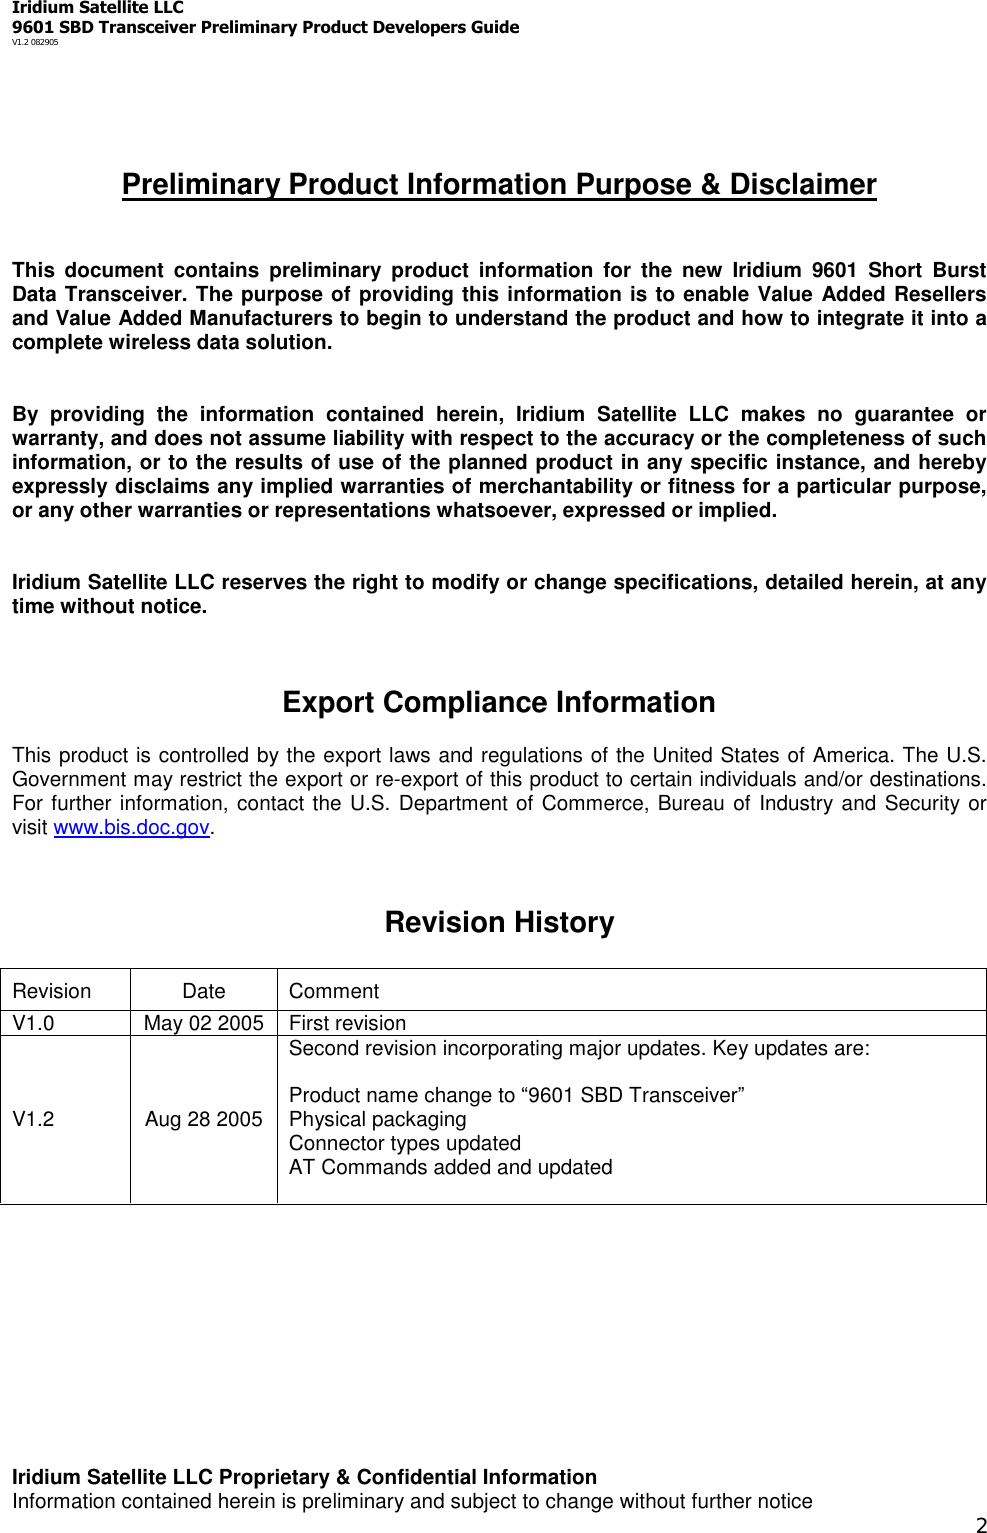 Iridium Satellite LLC9601 SBD Transceiver Preliminary Product Developers GuideV1.2 082905Iridium Satellite LLC Proprietary &amp; Confidential InformationInformation contained herein is preliminary and subject to change without further notice2Preliminary Product Information Purpose &amp; DisclaimerThis document contains preliminary product information for the new Iridium 9601 Short BurstData Transceiver. The purpose of providing this information is to enable Value Added Resellersand Value Added Manufacturers to begin to understand the product and how to integrate it into acomplete wireless data solution.By providing the information contained herein, Iridium Satellite LLC makes no guarantee orwarranty, and does not assume liability with respect to the accuracy or the completeness of suchinformation, or to the results of use of the planned product in any specific instance, and herebyexpressly disclaims any implied warranties of merchantability or fitness for a particular purpose,or any other warranties or representations whatsoever, expressed or implied.Iridium Satellite LLC reserves the right to modify or change specifications, detailed herein, at anytime without notice.Export Compliance InformationThis product is controlled by the export laws and regulations of the United States of America. The U.S.Government may restrict the export or re-export of this product to certain individuals and/or destinations.For further information, contact the U.S. Department of Commerce, Bureau of Industry and Security orvisit www.bis.doc.gov.Revision HistoryRevision Date CommentV1.0 May 02 2005 First revisionV1.2 Aug 28 2005Second revision incorporating major updates. Key updates are:Product name change to “9601 SBD Transceiver”Physical packagingConnector types updatedAT Commands added and updated